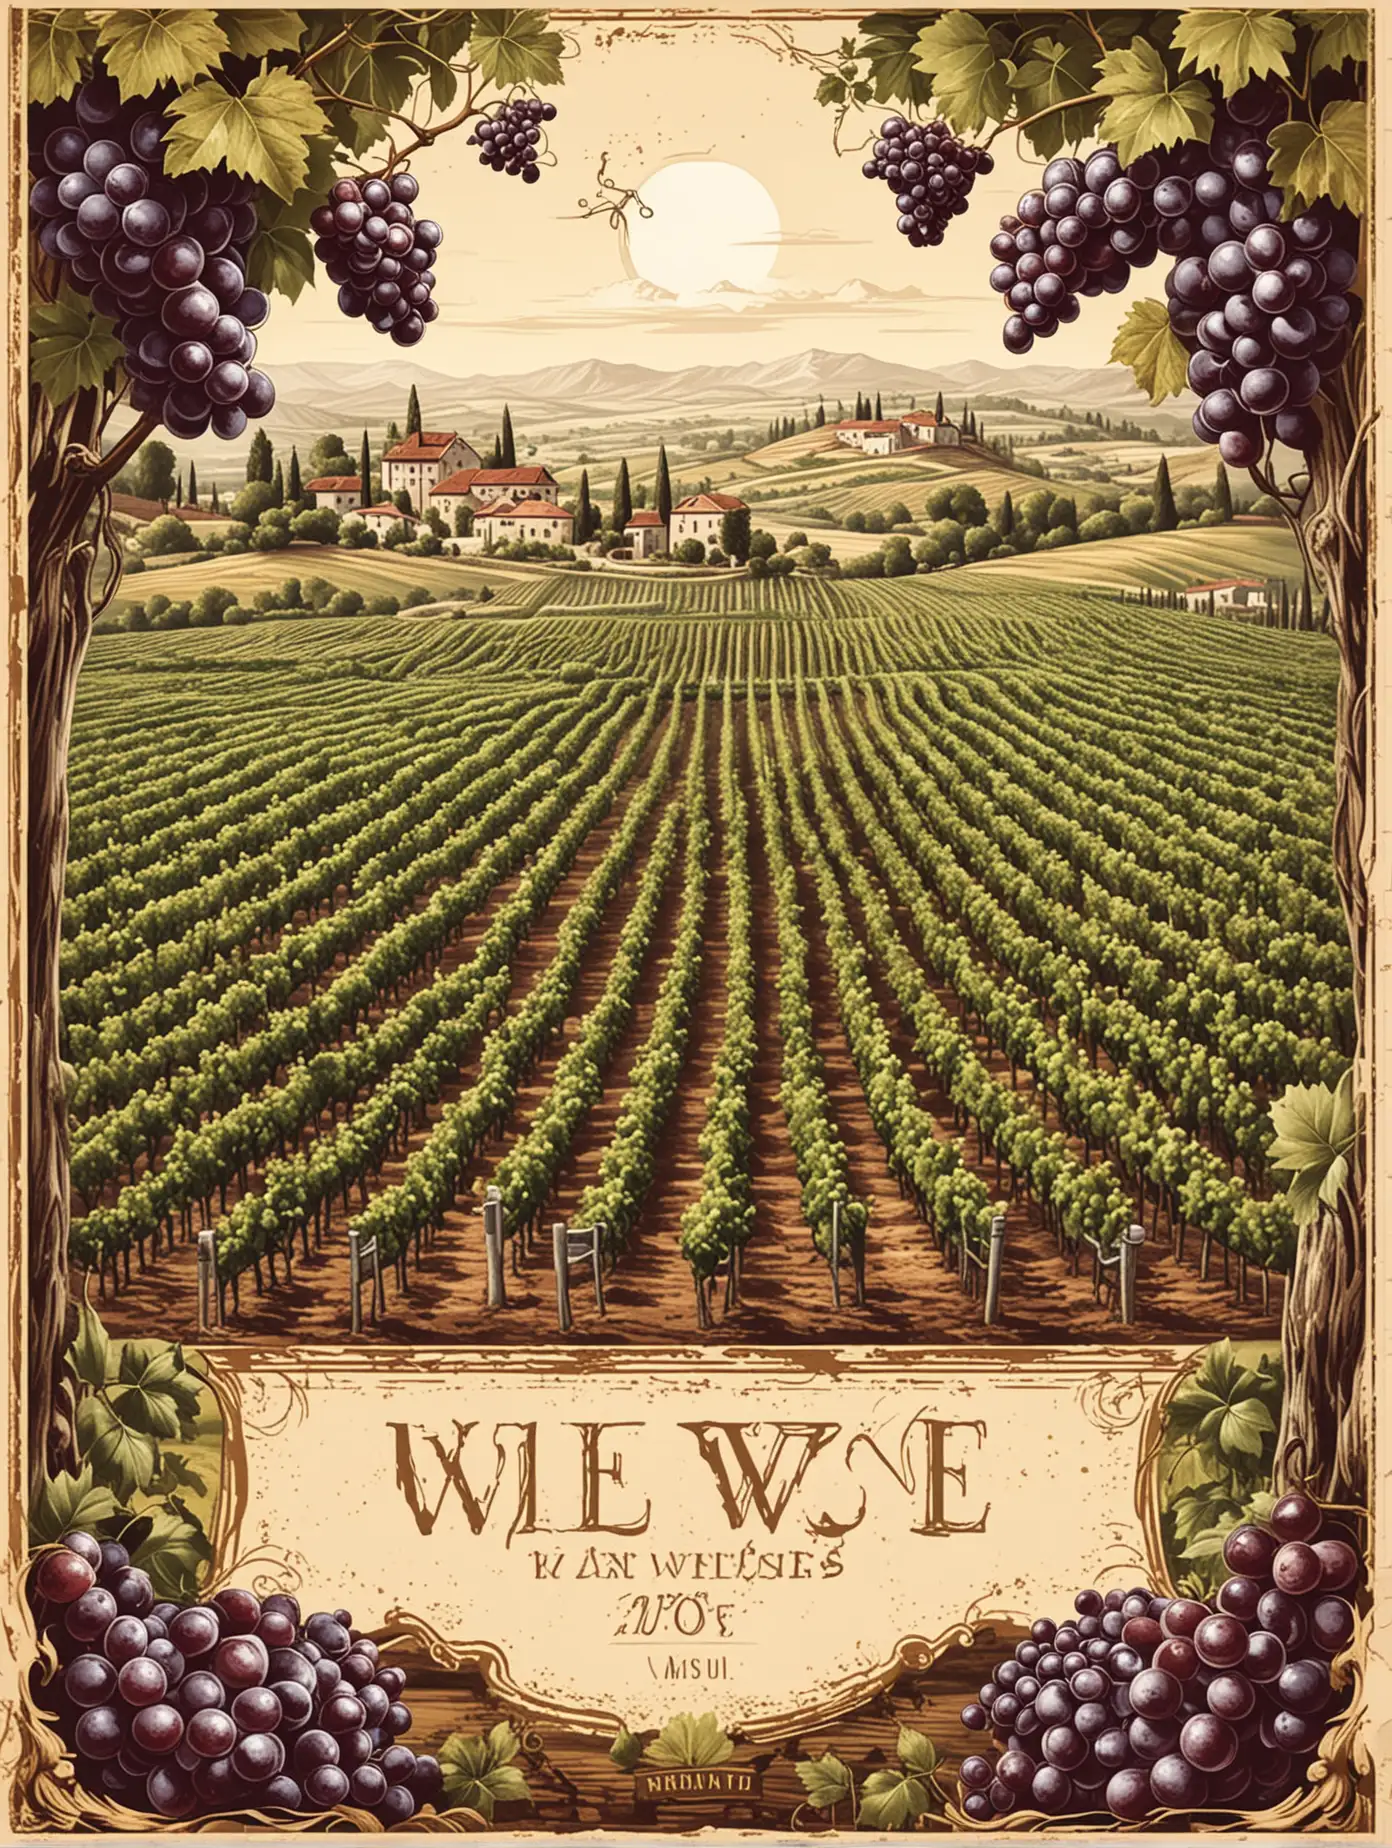 Scenic Vineyard Landscape with Grapes and Rows of Vines